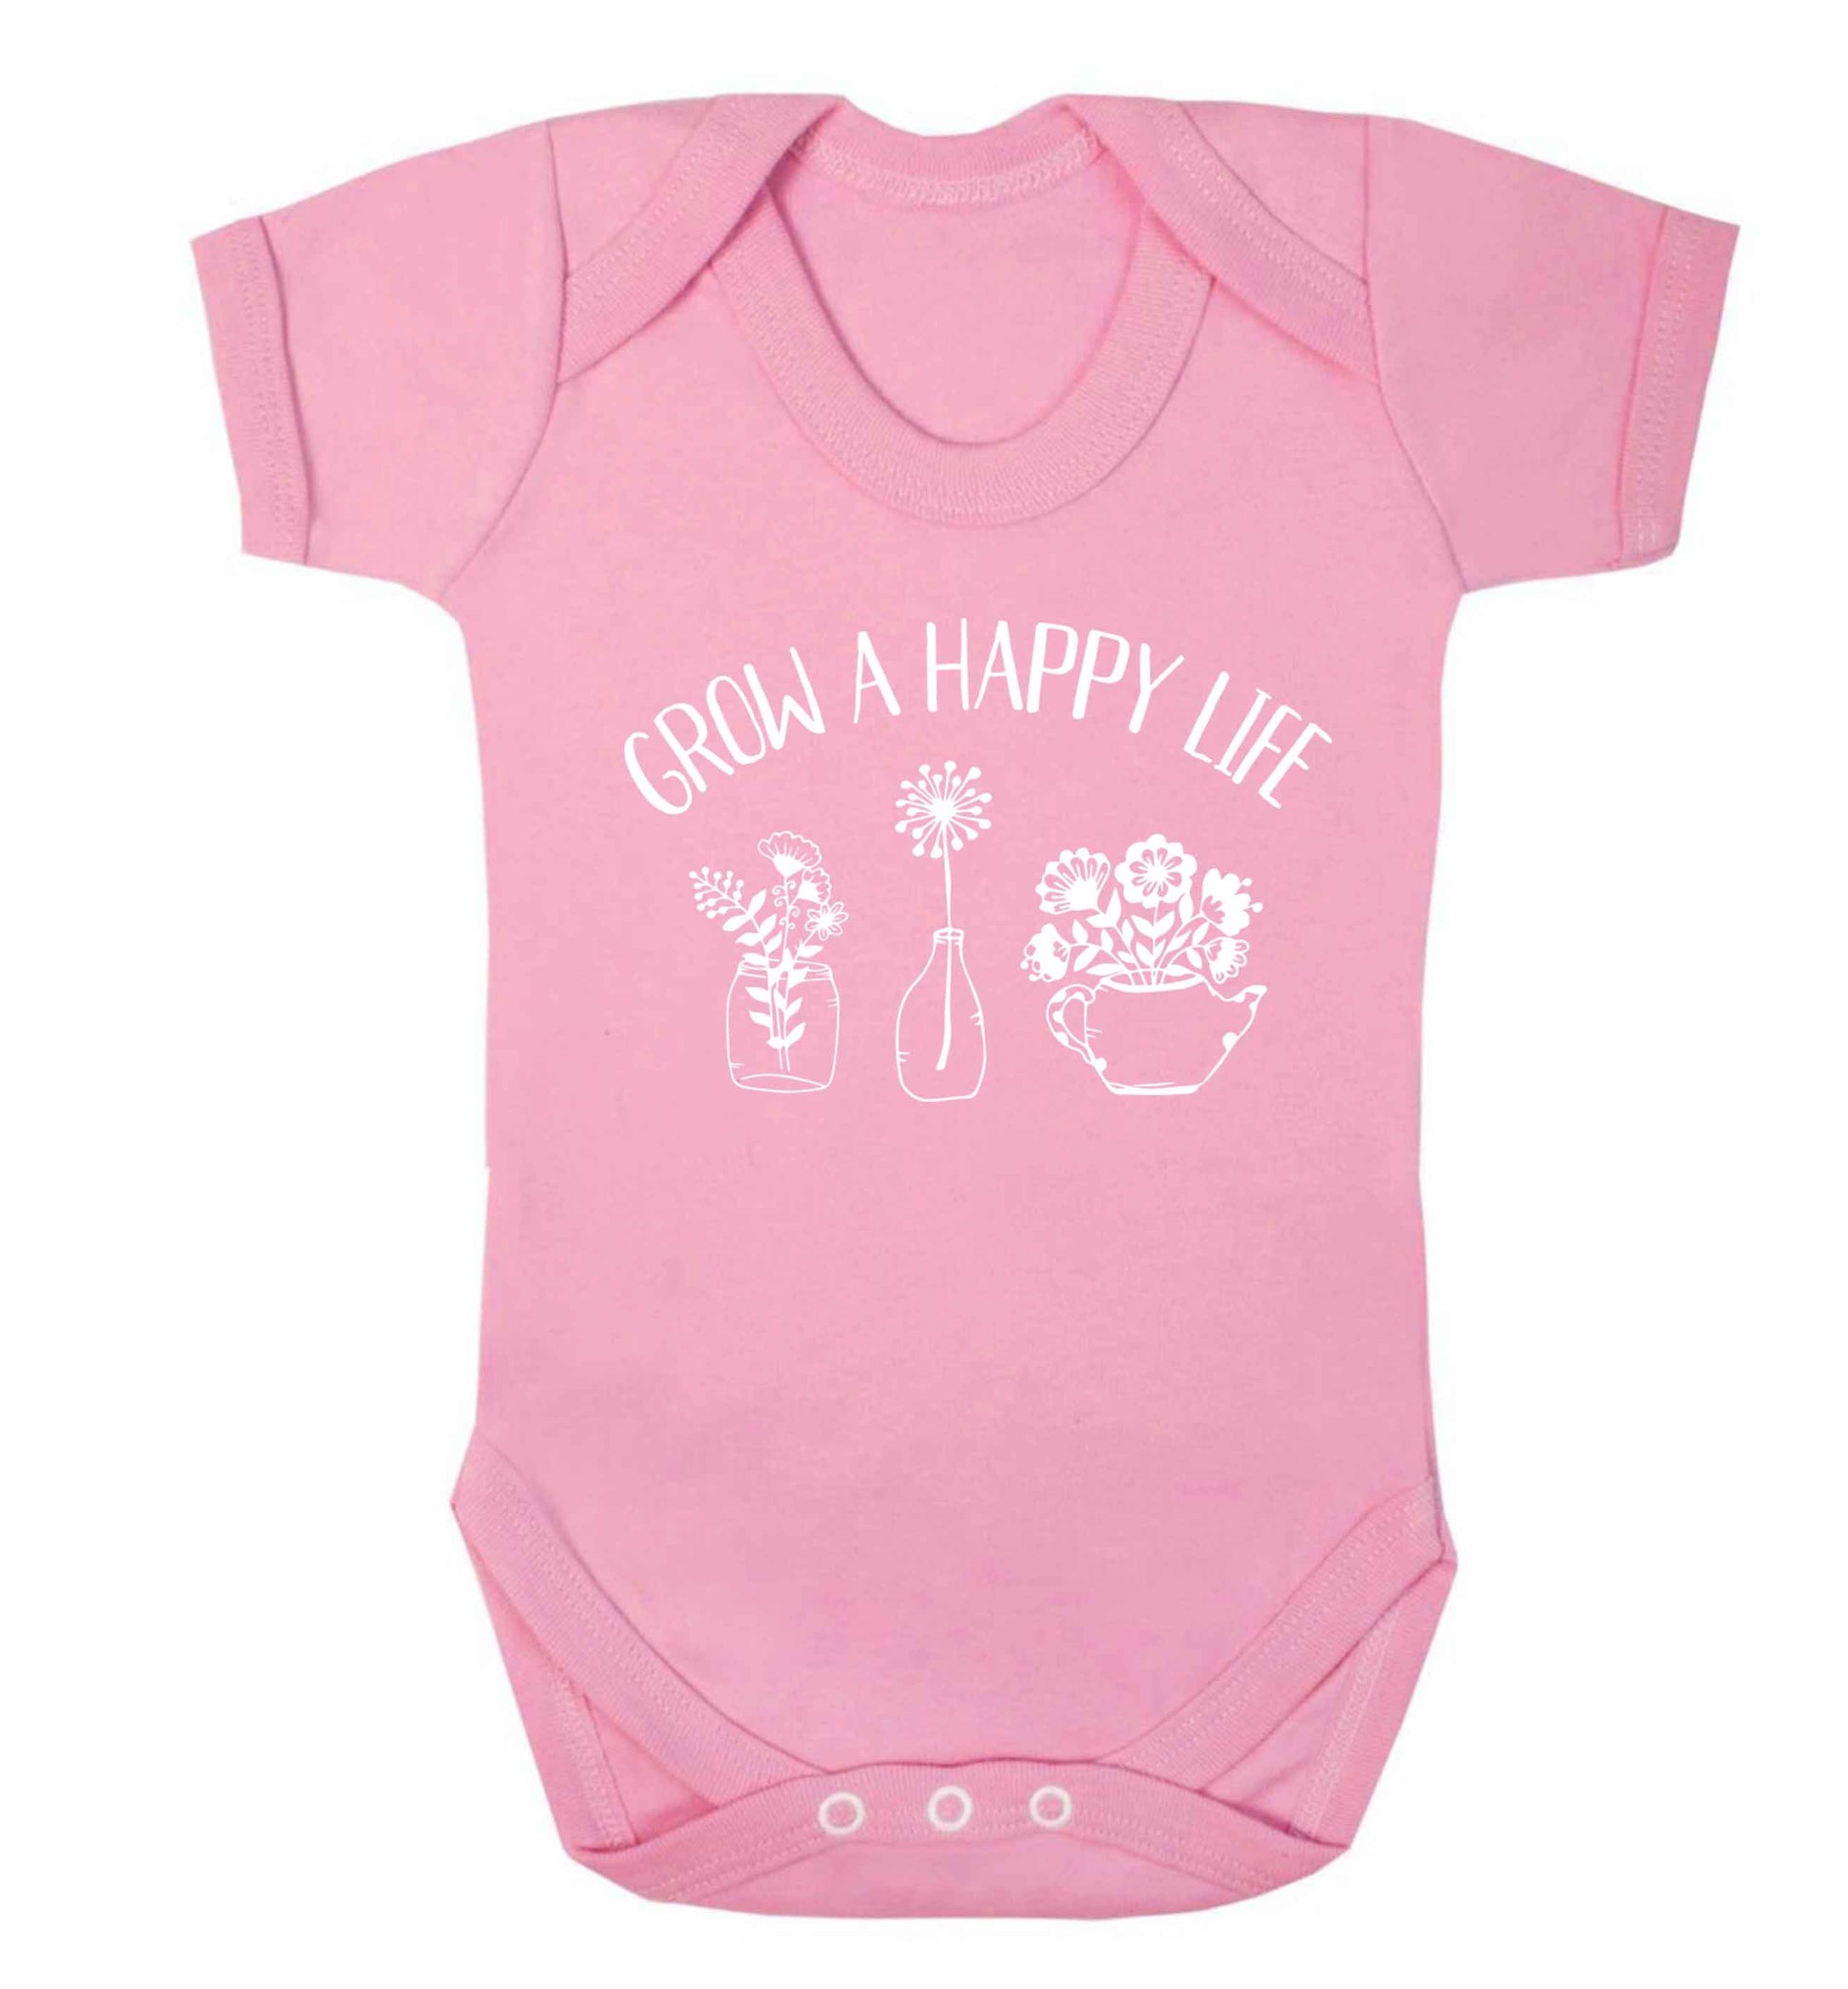 Grow a happy life Baby Vest pale pink 18-24 months